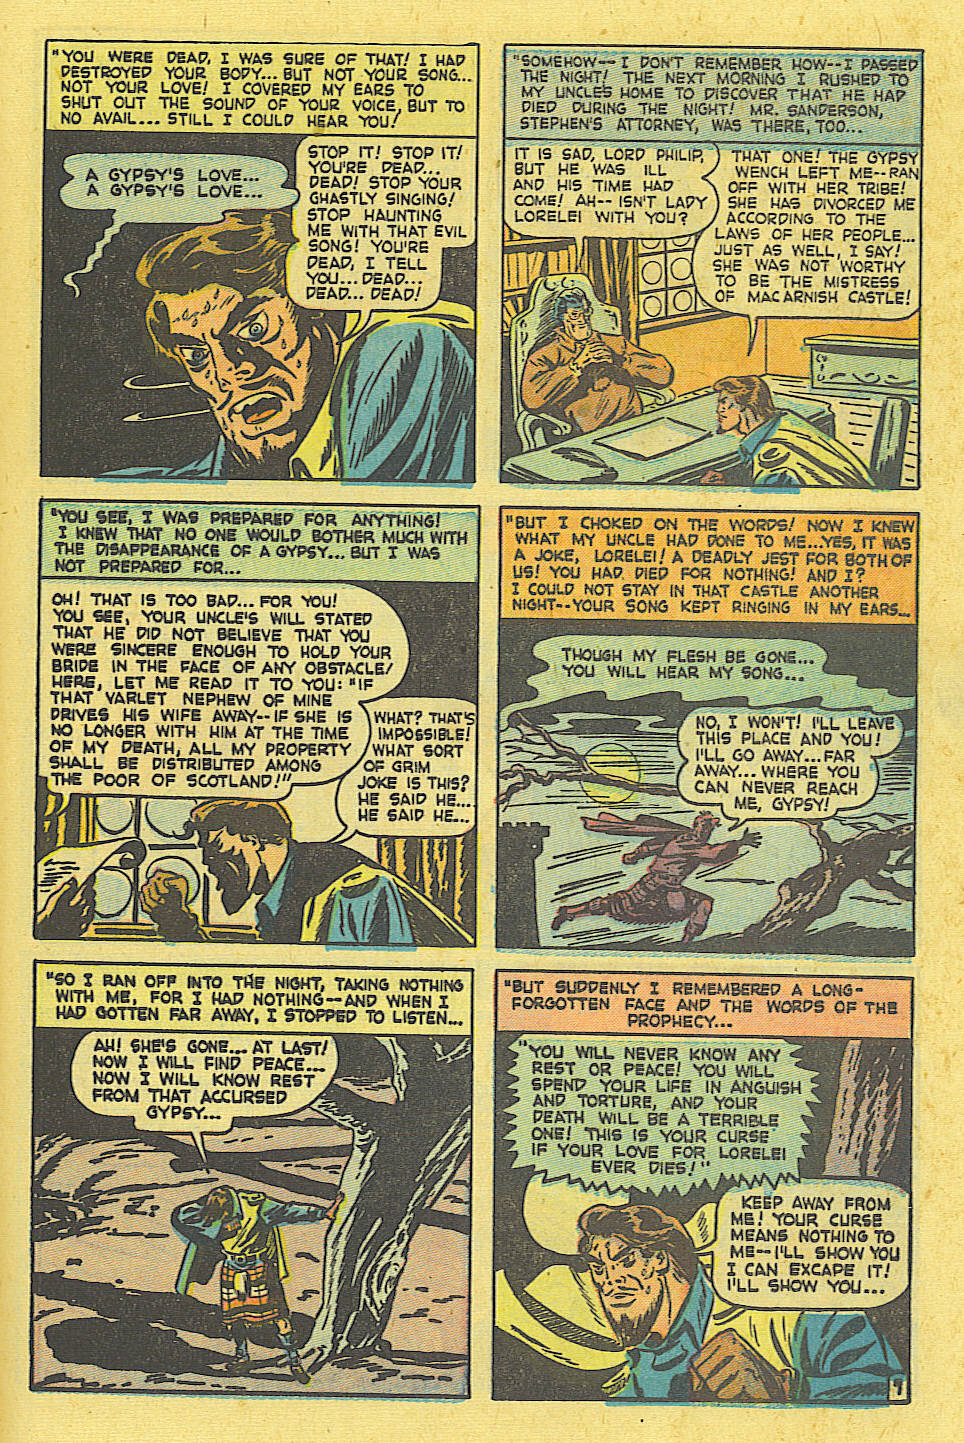 Marvel Tales (1949) 95 Page 16